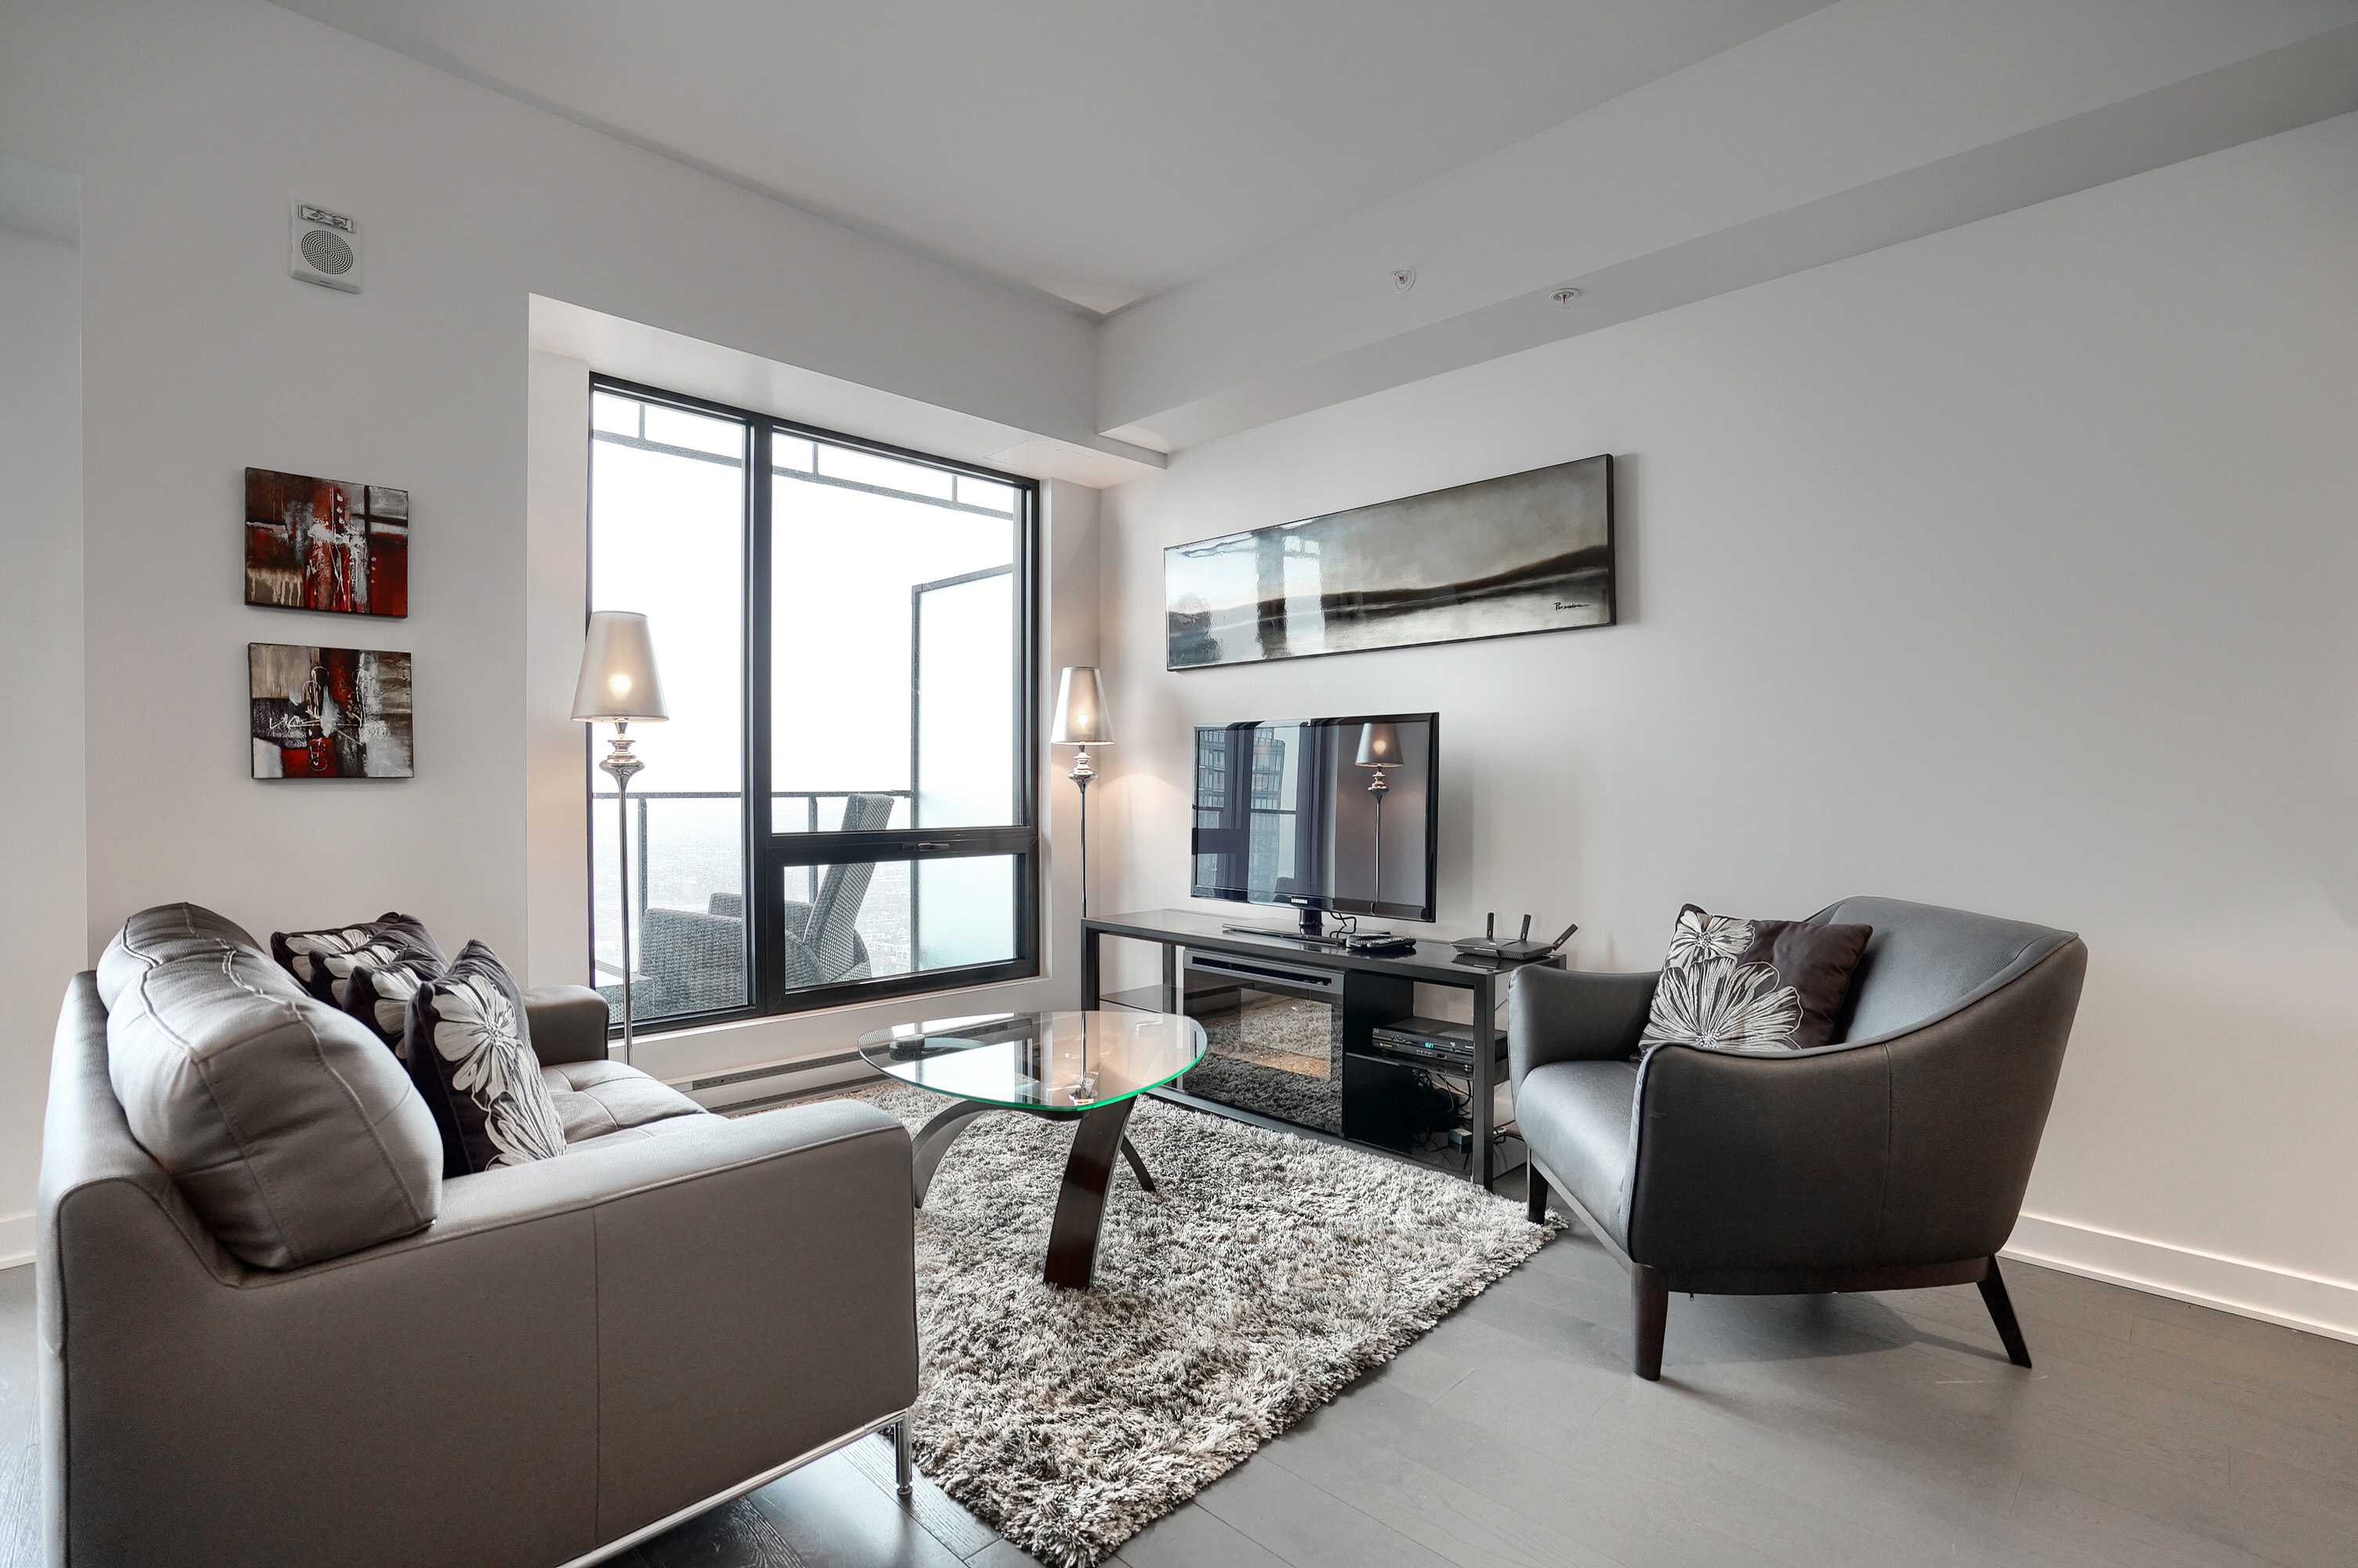 View into the designer living room in this furnished short term housing apartment in montreal. Dark gray leather couch & chair, light fluffy rug under a glass table. Large sunny windows. 